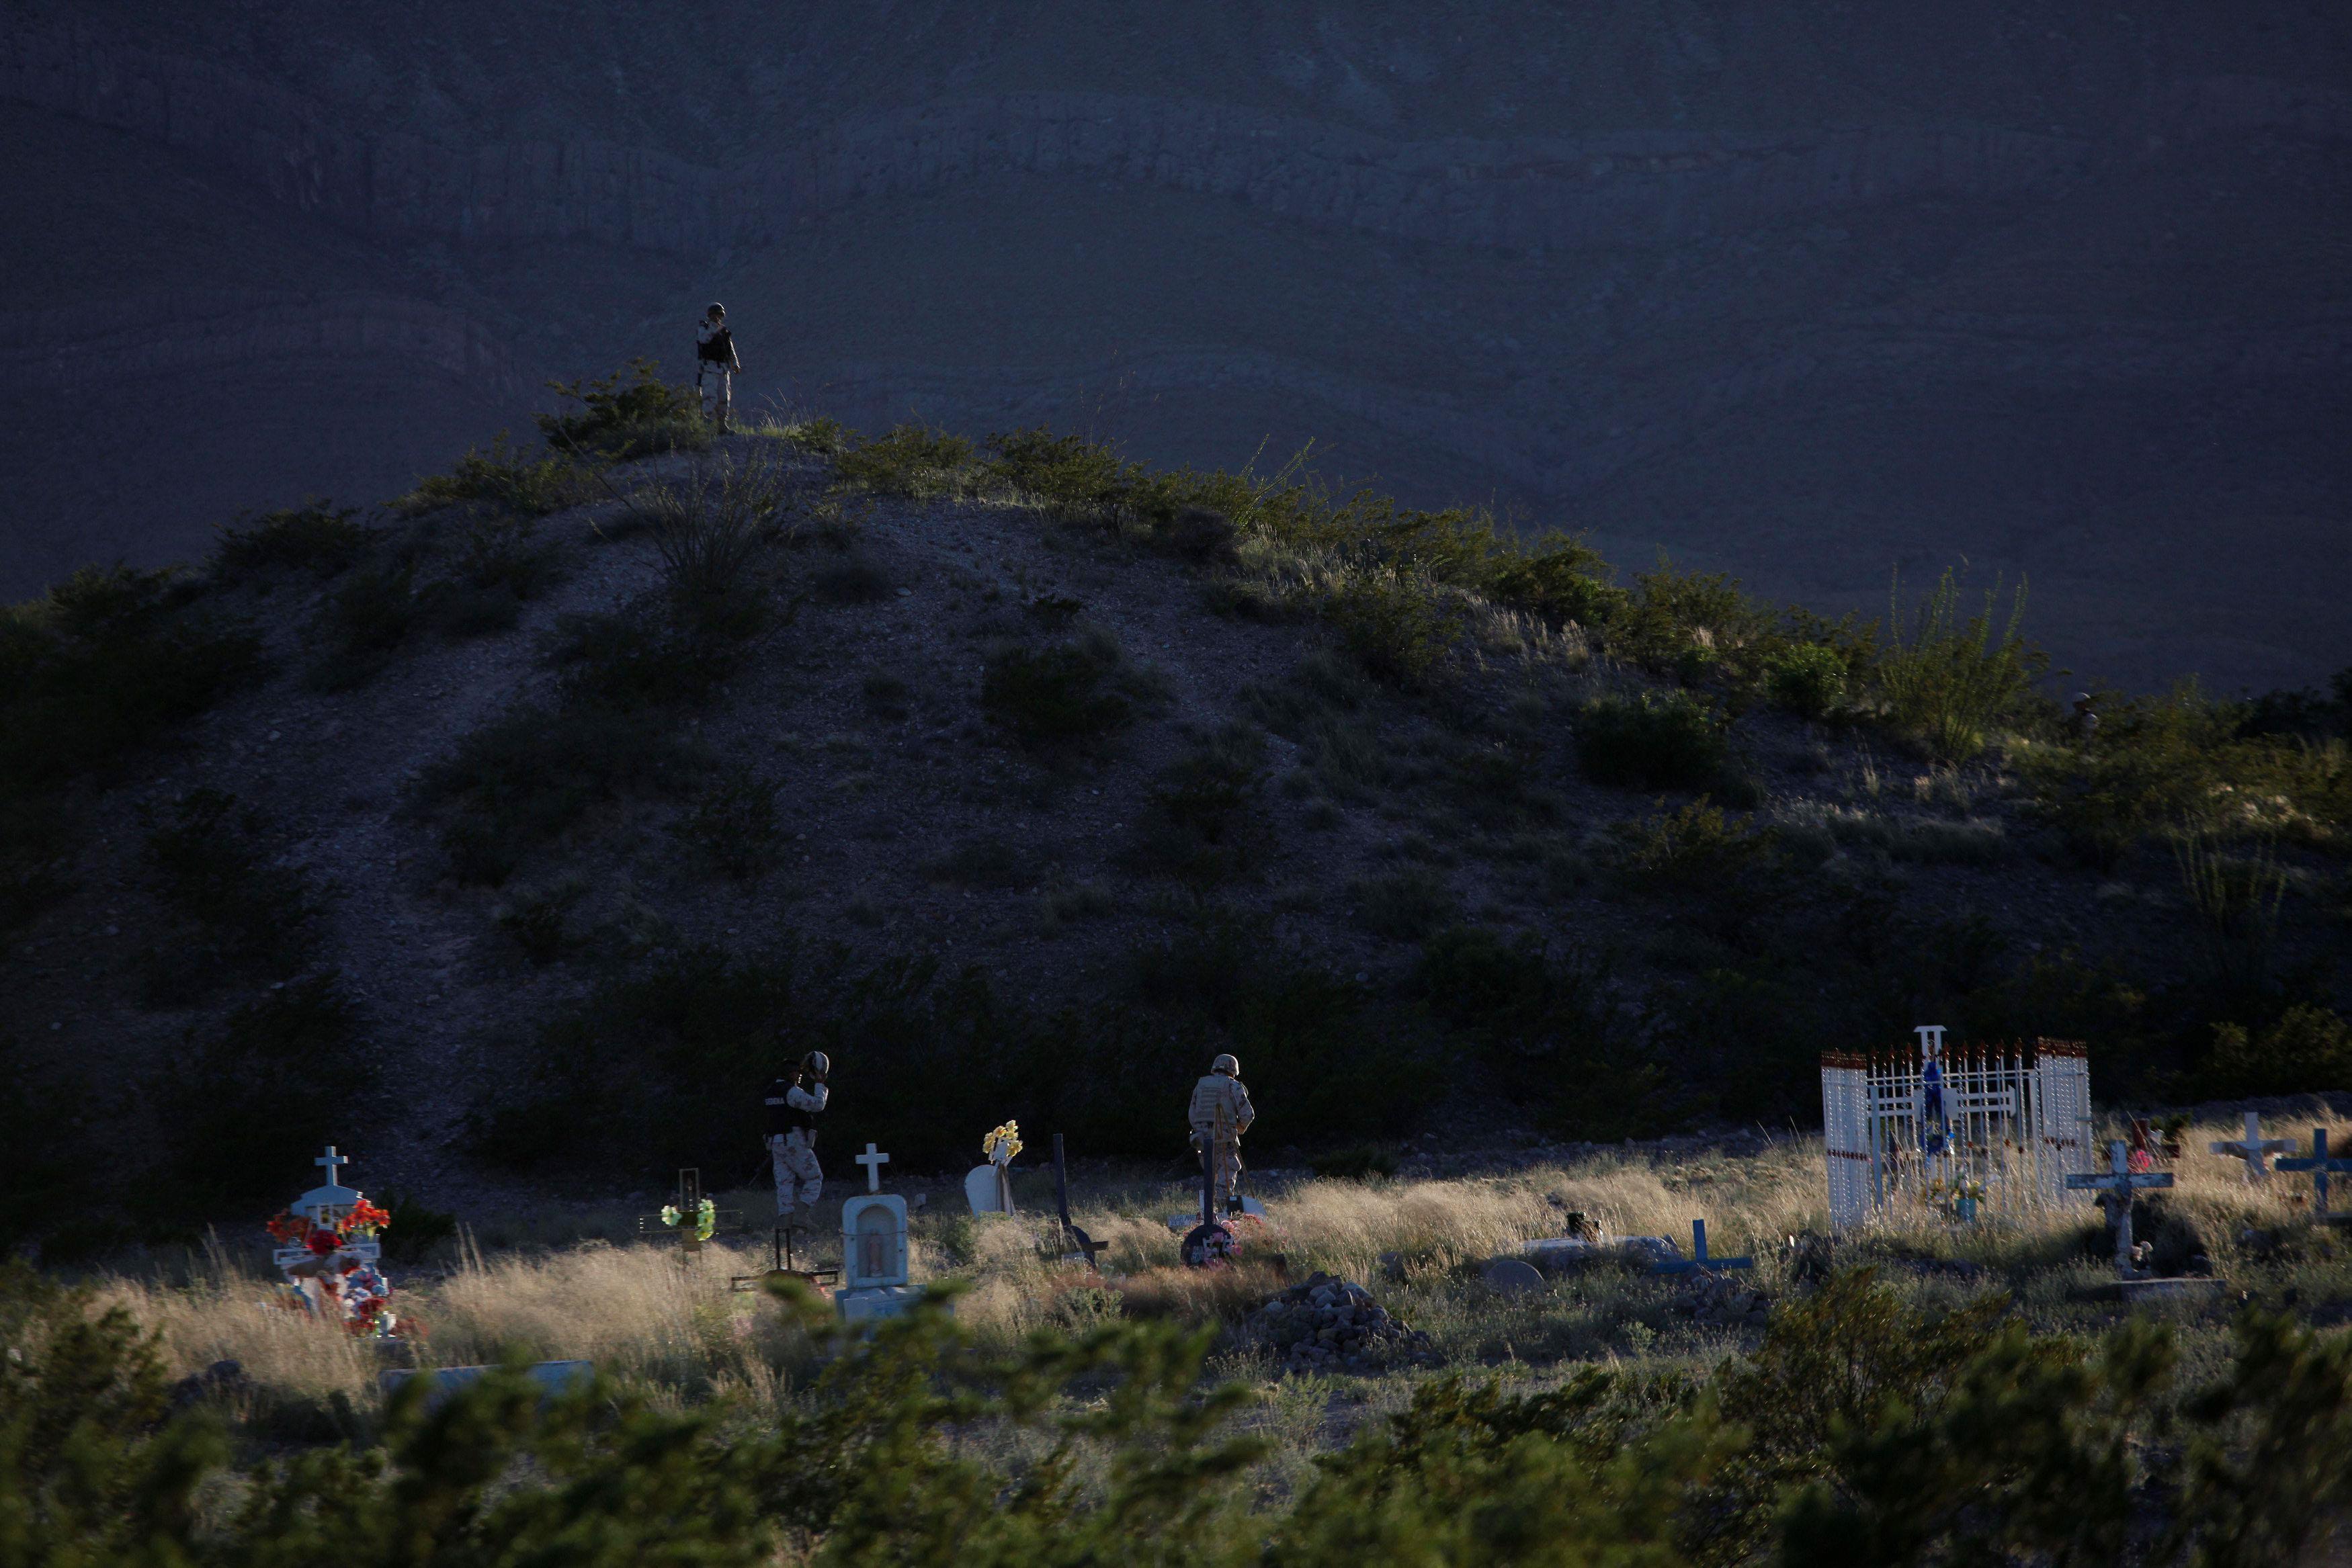 Soldiers patrol on foot at a cemetery after a gunfight with unknown assailants at Juarez Valley, on 